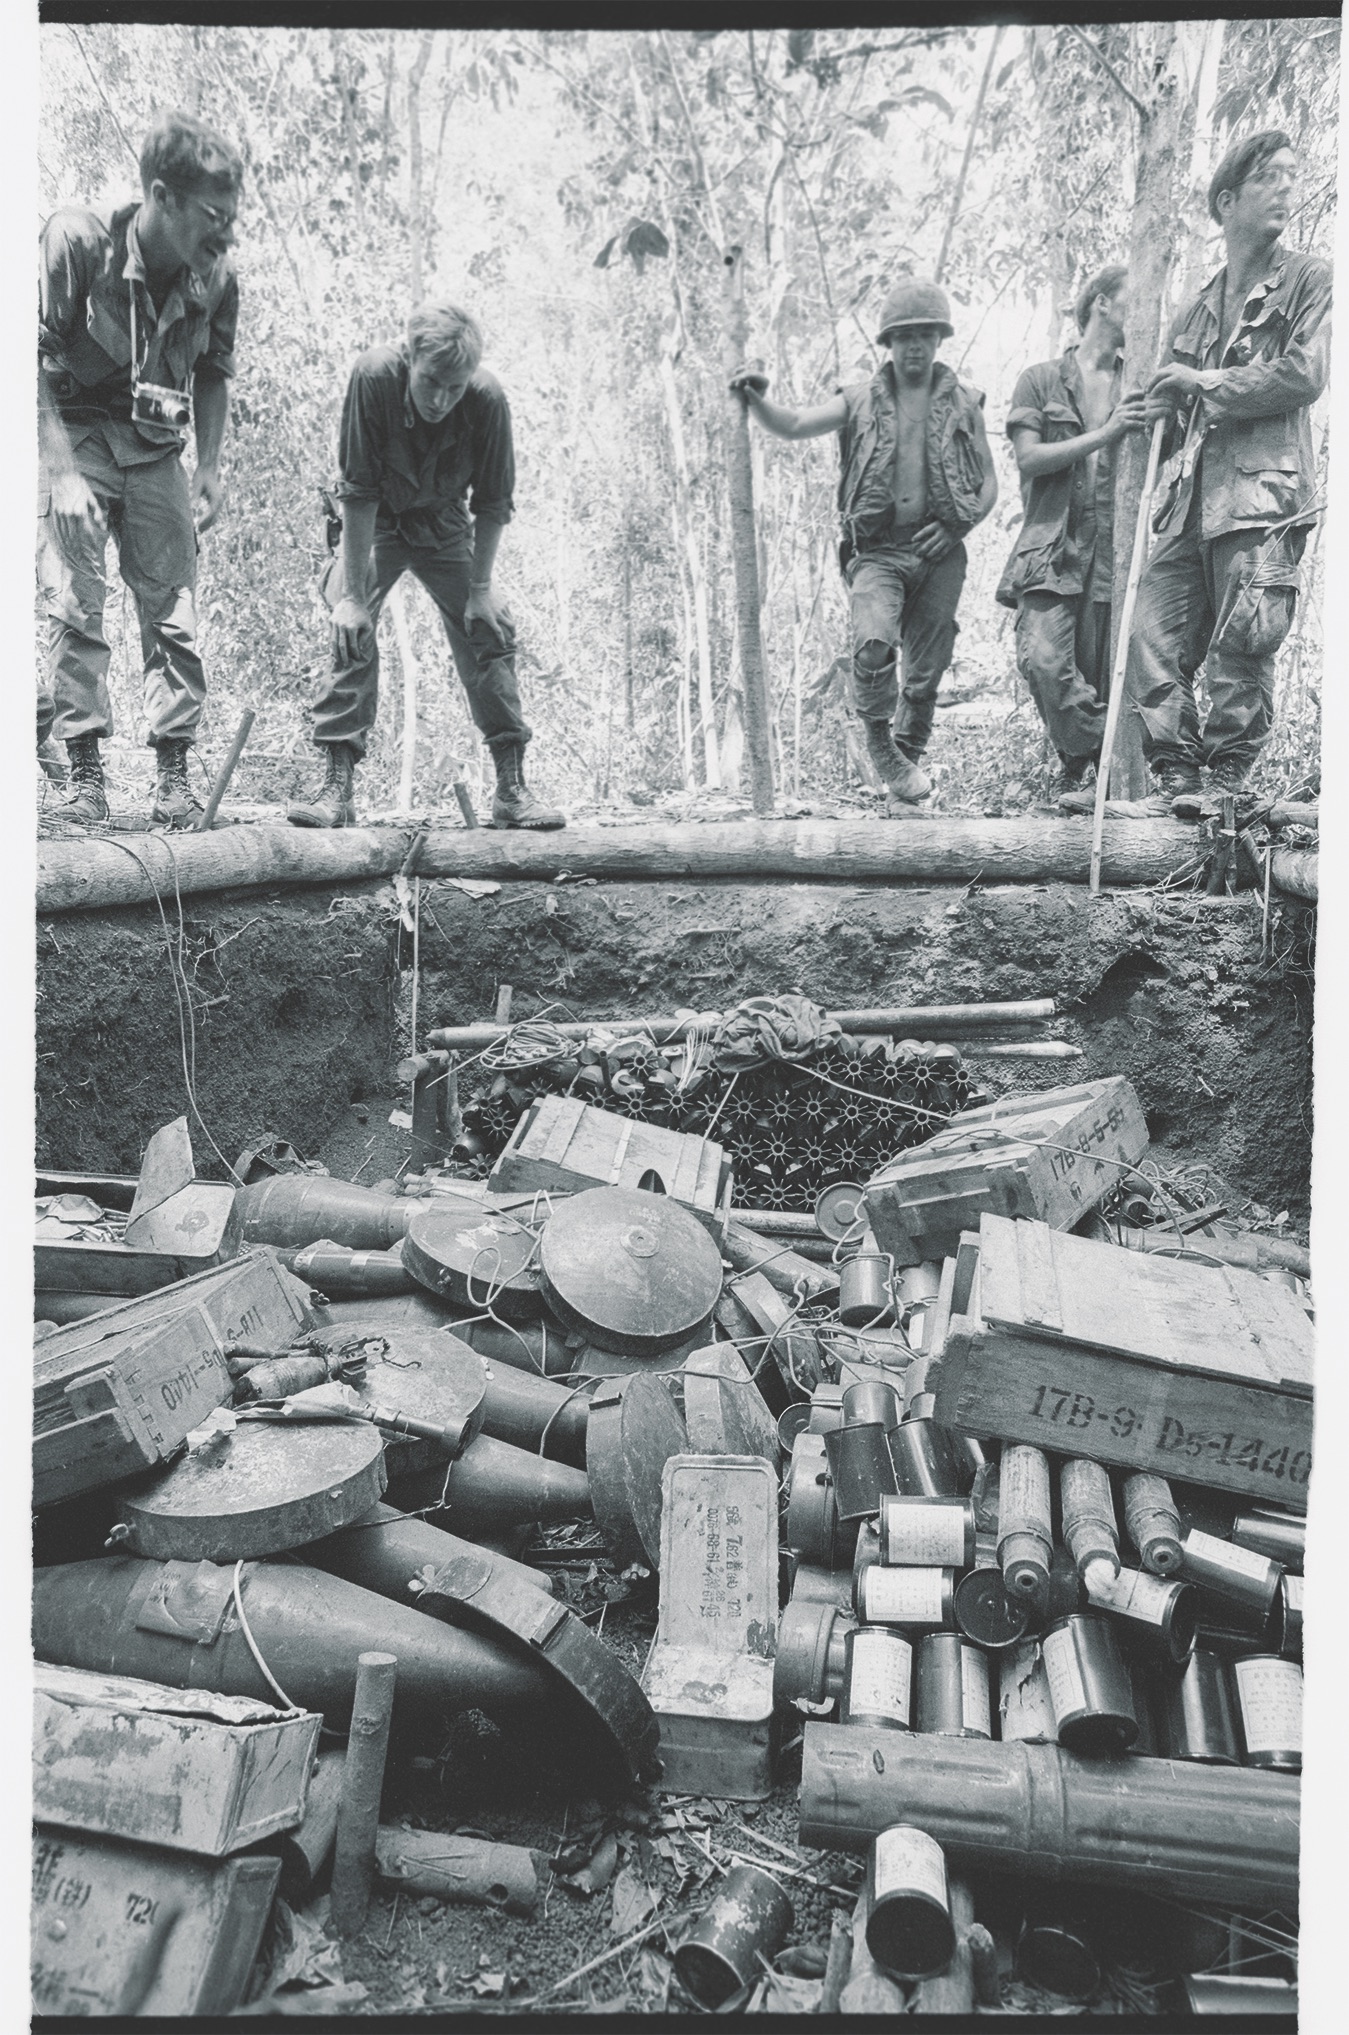 A pit filled with communist supplies, including rockets and mortar shells, is discovered on May 3 in the Fishhook area by 11th Armored Cavalry troops. (Bettmann/Getty Images)